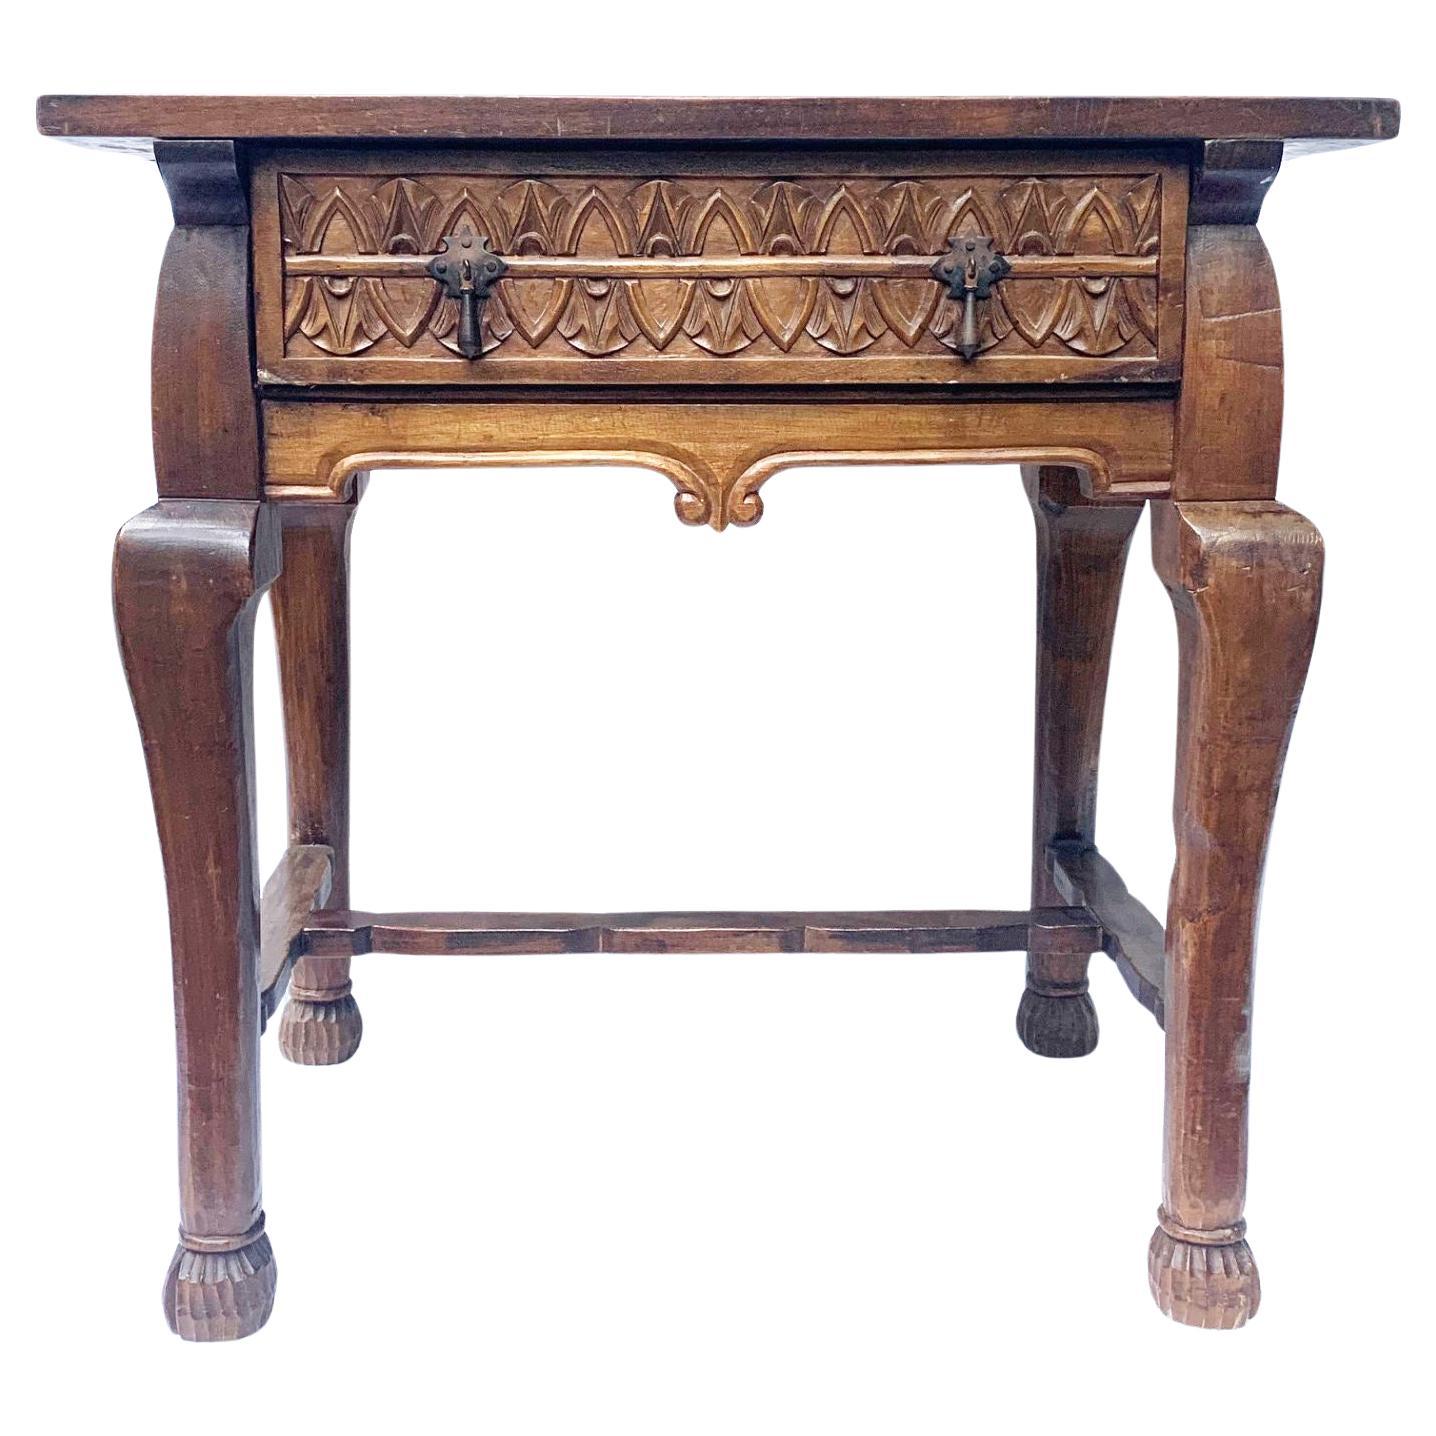 Circa 1940 Spanish Colonial Revival Sideboard Table Console